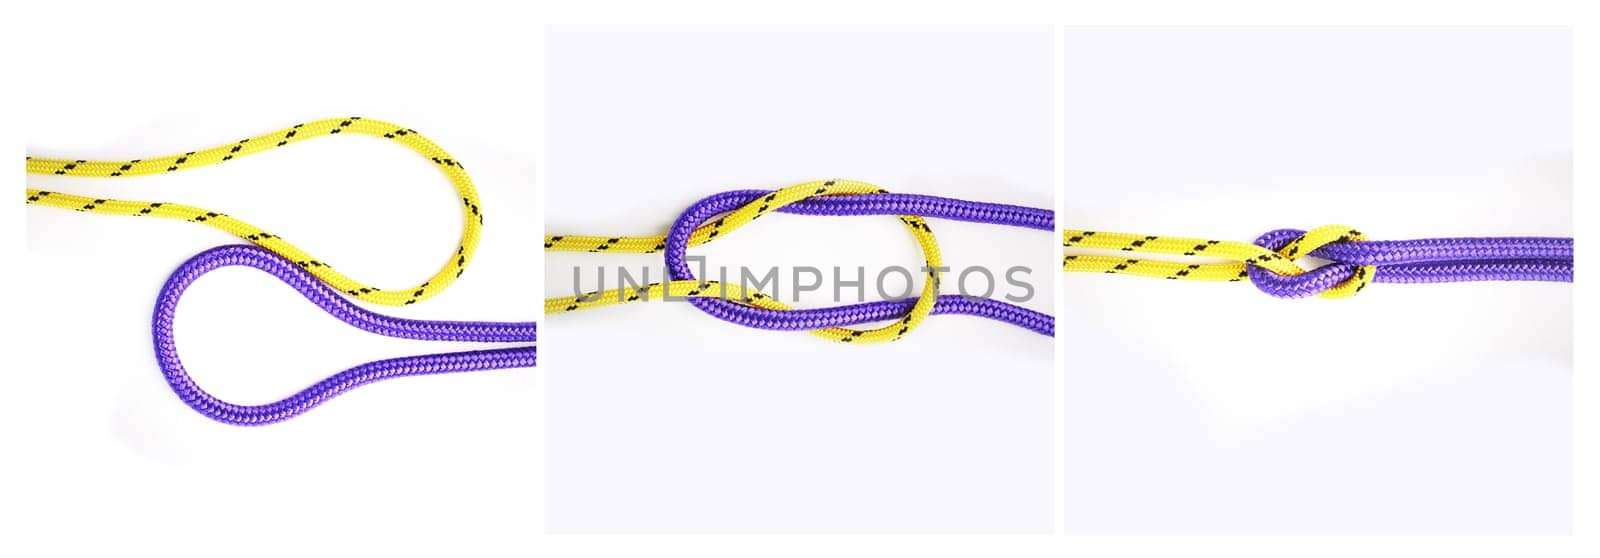 Sailor, knot and how to tie with rope in tutorial, guide or info steps to connect string for security. Creative, pattern and template instructions to loop textile thread in chain with strong link.